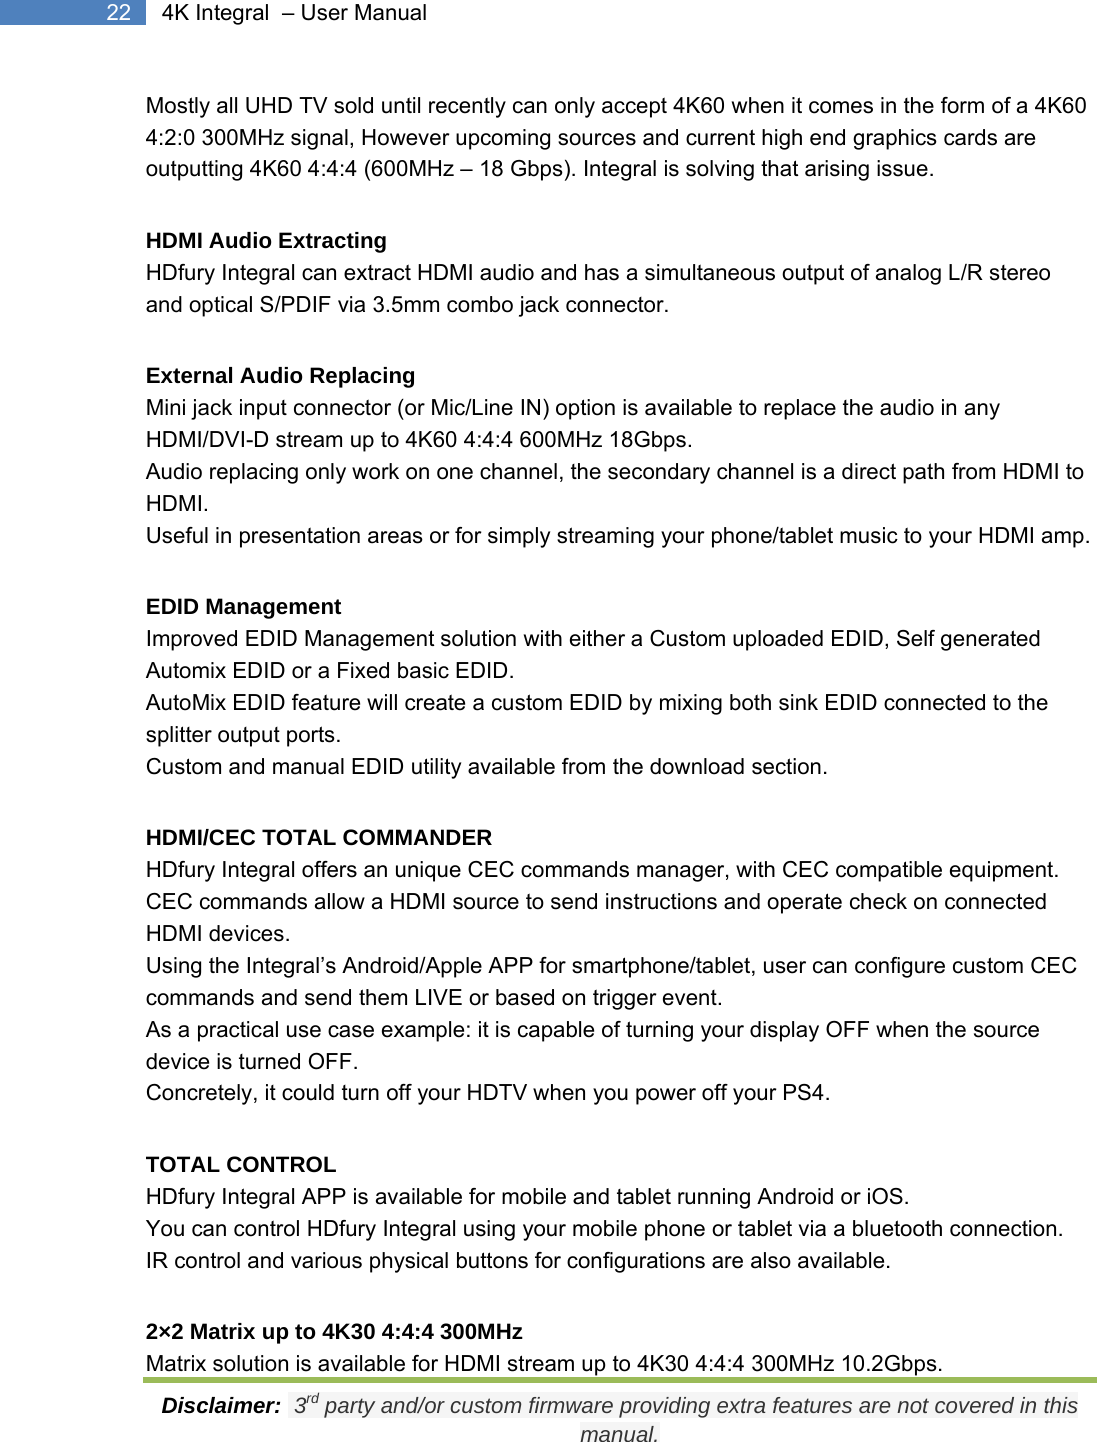  Disclaimer:  3rd party and/or custom firmware providing extra features are not covered in this manual. 22  4K Integral  – User Manual Mostly all UHD TV sold until recently can only accept 4K60 when it comes in the form of a 4K60 4:2:0 300MHz signal, However upcoming sources and current high end graphics cards are outputting 4K60 4:4:4 (600MHz – 18 Gbps). Integral is solving that arising issue. HDMI Audio Extracting HDfury Integral can extract HDMI audio and has a simultaneous output of analog L/R stereo and optical S/PDIF via 3.5mm combo jack connector. External Audio Replacing Mini jack input connector (or Mic/Line IN) option is available to replace the audio in any HDMI/DVI-D stream up to 4K60 4:4:4 600MHz 18Gbps. Audio replacing only work on one channel, the secondary channel is a direct path from HDMI to HDMI. Useful in presentation areas or for simply streaming your phone/tablet music to your HDMI amp. EDID Management Improved EDID Management solution with either a Custom uploaded EDID, Self generated Automix EDID or a Fixed basic EDID. AutoMix EDID feature will create a custom EDID by mixing both sink EDID connected to the splitter output ports. Custom and manual EDID utility available from the download section. HDMI/CEC TOTAL COMMANDER HDfury Integral offers an unique CEC commands manager, with CEC compatible equipment. CEC commands allow a HDMI source to send instructions and operate check on connected HDMI devices. Using the Integral’s Android/Apple APP for smartphone/tablet, user can configure custom CEC commands and send them LIVE or based on trigger event. As a practical use case example: it is capable of turning your display OFF when the source device is turned OFF. Concretely, it could turn off your HDTV when you power off your PS4. TOTAL CONTROL HDfury Integral APP is available for mobile and tablet running Android or iOS. You can control HDfury Integral using your mobile phone or tablet via a bluetooth connection. IR control and various physical buttons for configurations are also available. 2×2 Matrix up to 4K30 4:4:4 300MHz Matrix solution is available for HDMI stream up to 4K30 4:4:4 300MHz 10.2Gbps. 